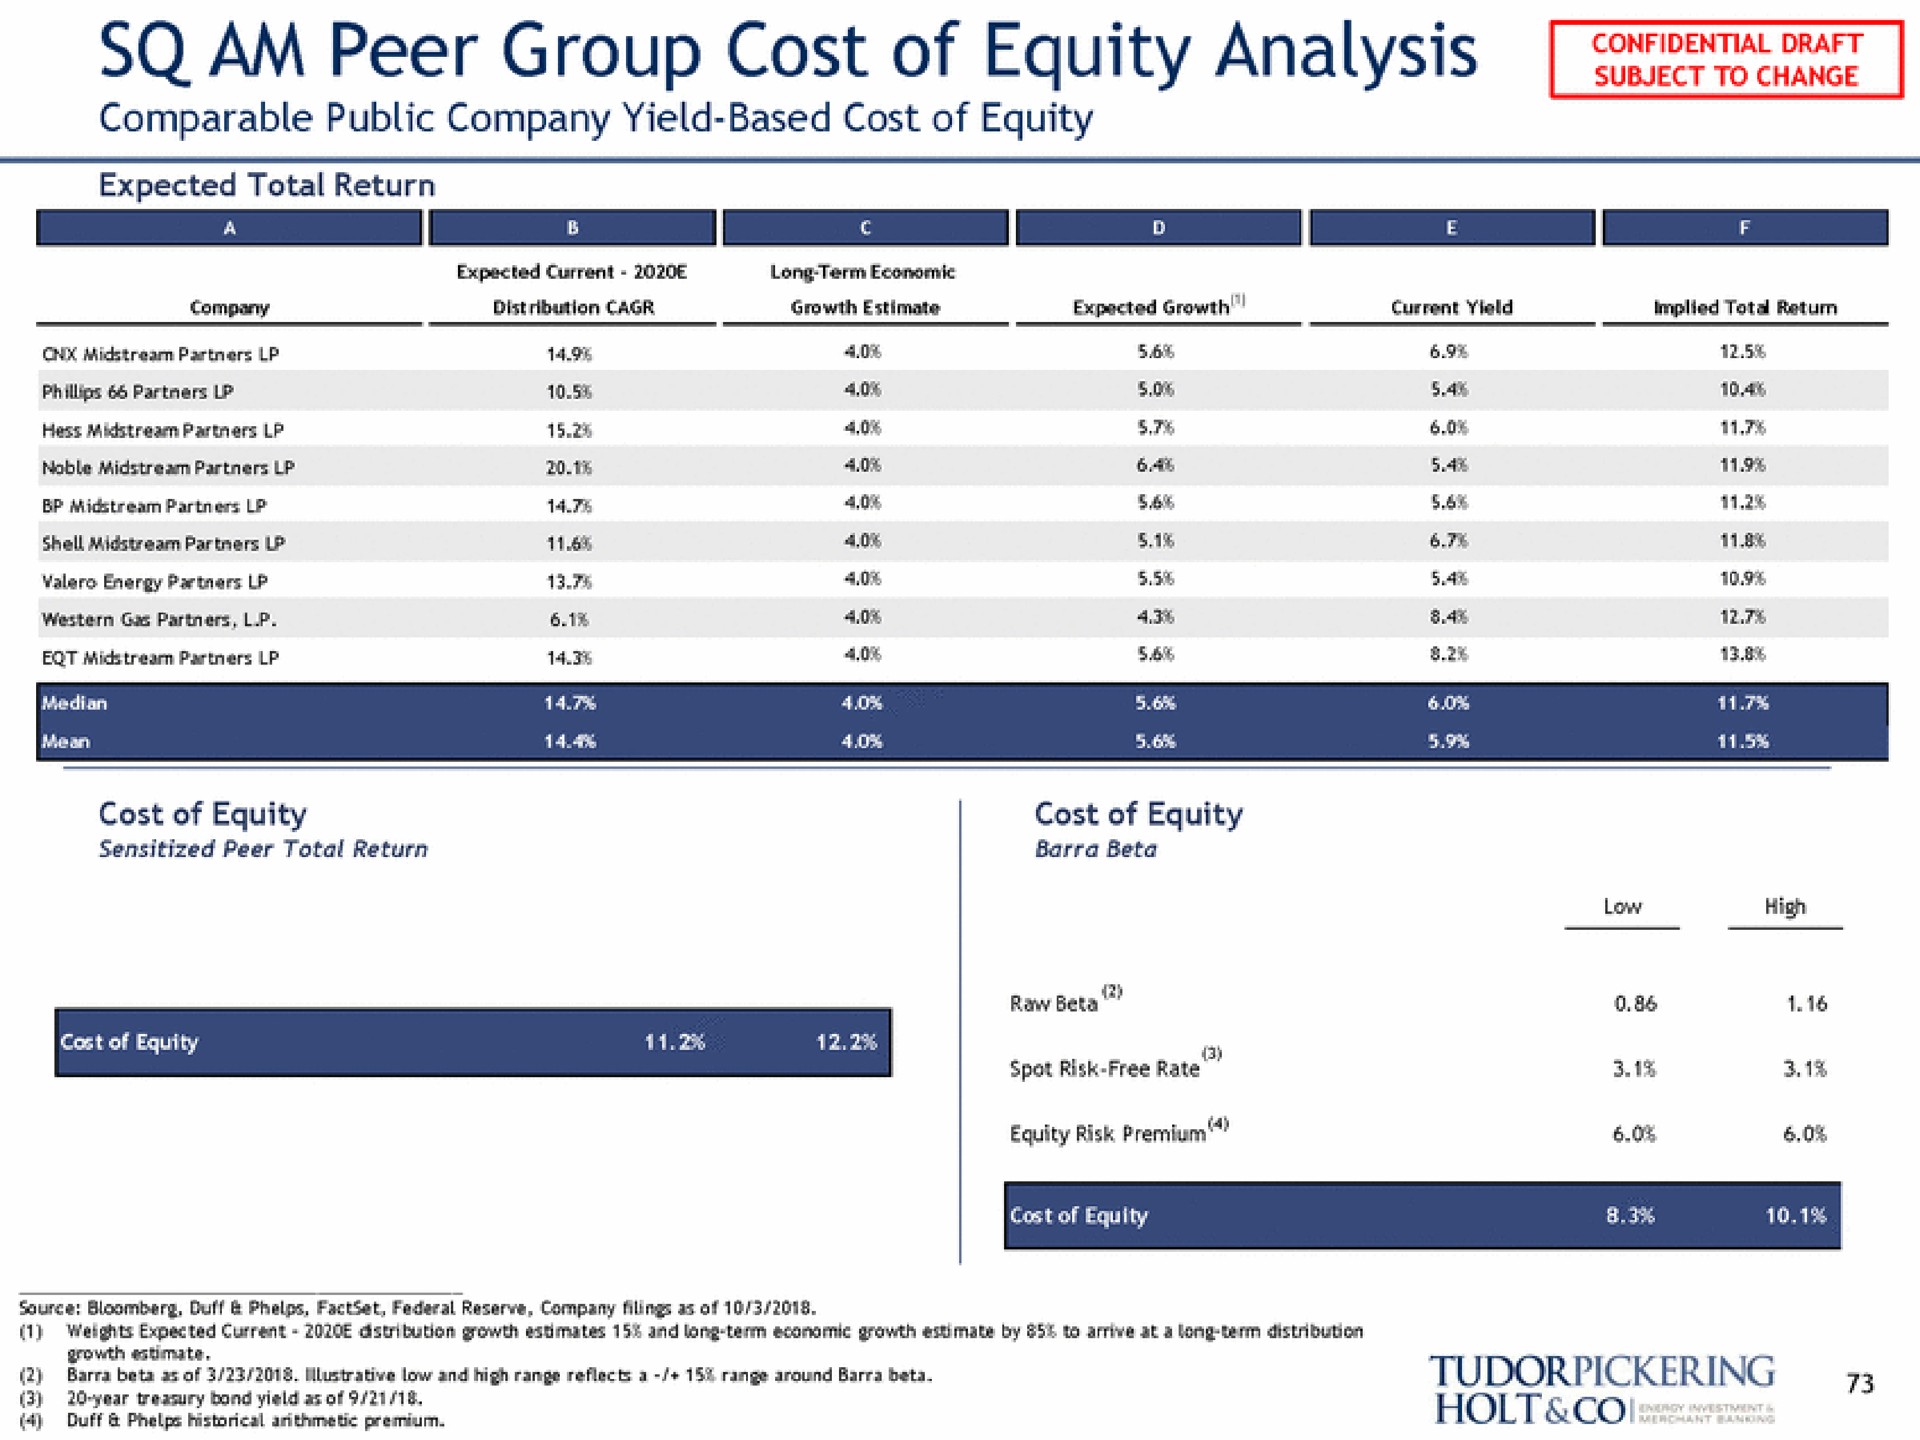 am peer group cost of equity analysis comparable public company yield based cost of equity an pee | Tudor, Pickering, Holt & Co